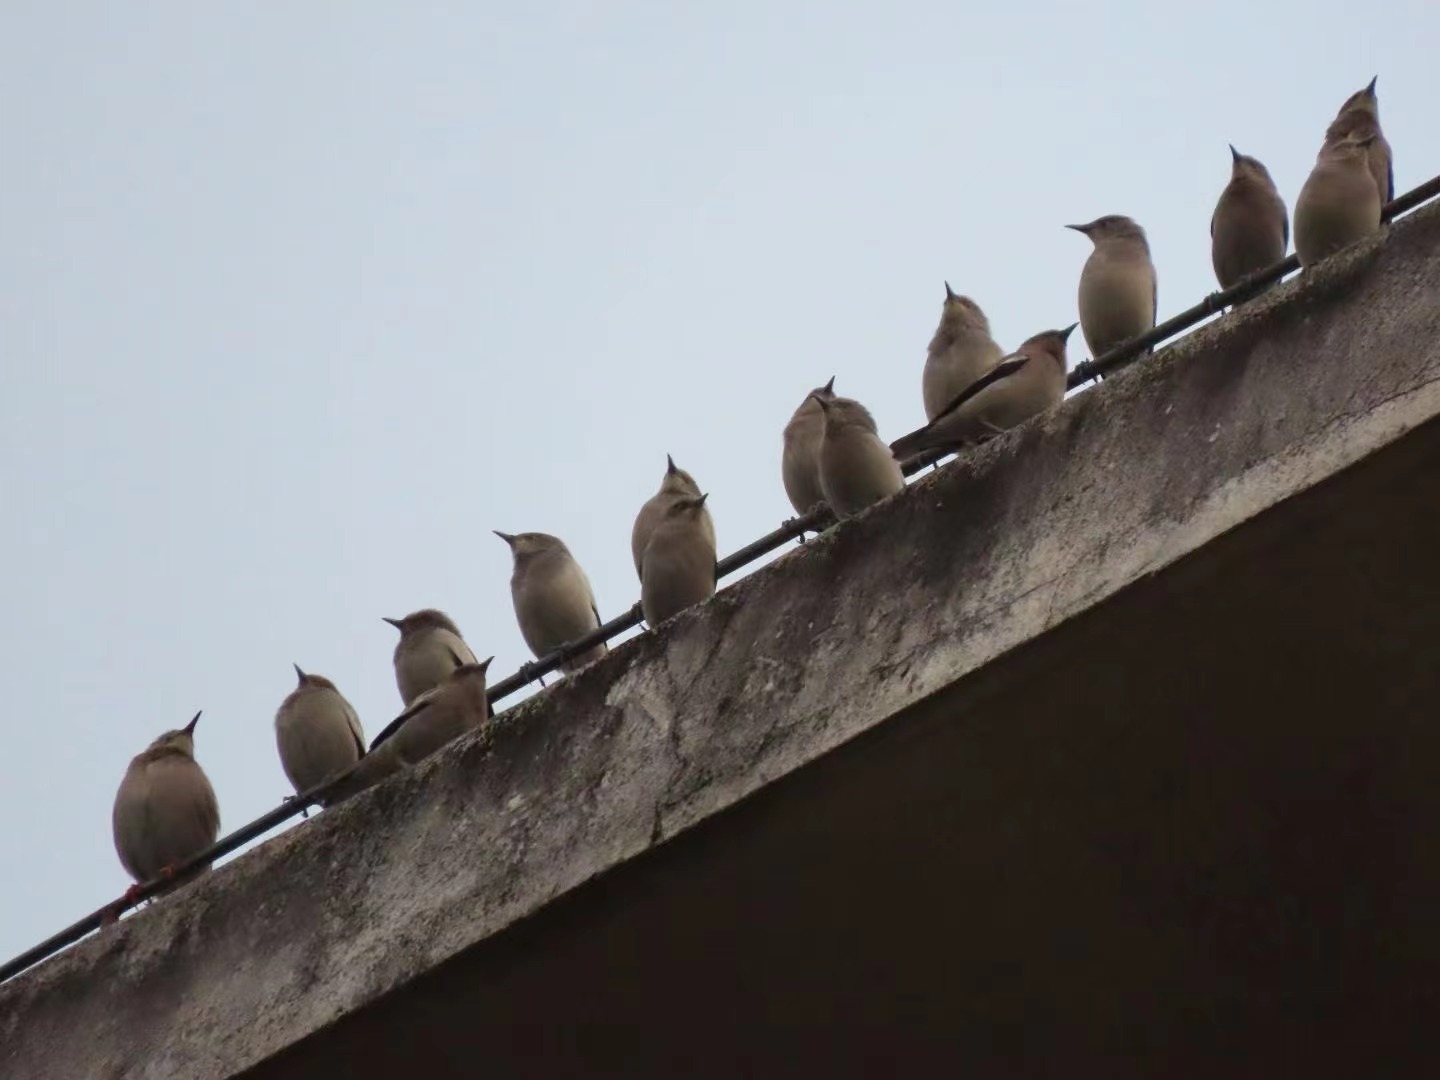 A flock of white-shouldered starlings perches on the roof of a building near the lake, preparing for an early morning flight to the mountainous area in the distance. Every night, the birds return and rest on the trees surrounding the lake.